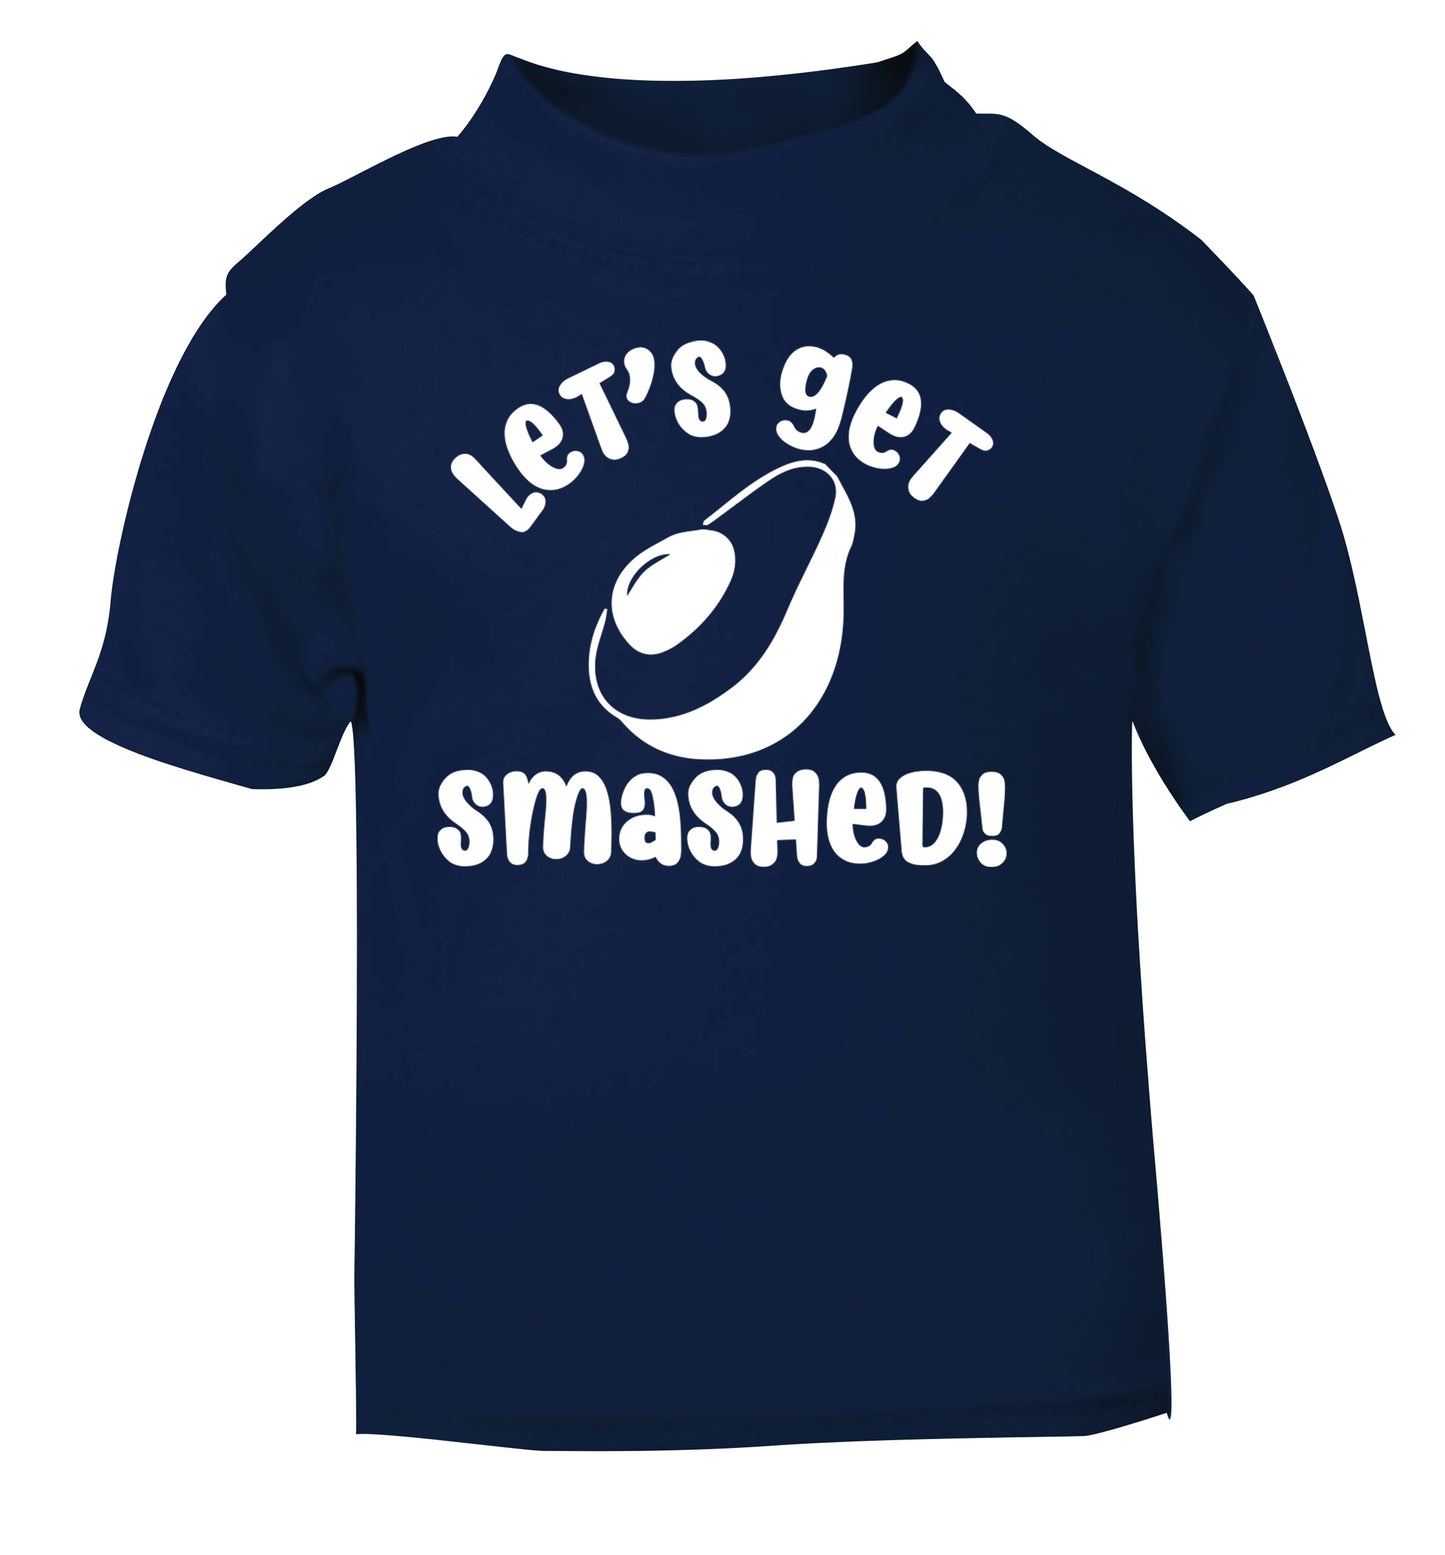 Let's get smashed navy Baby Toddler Tshirt 2 Years